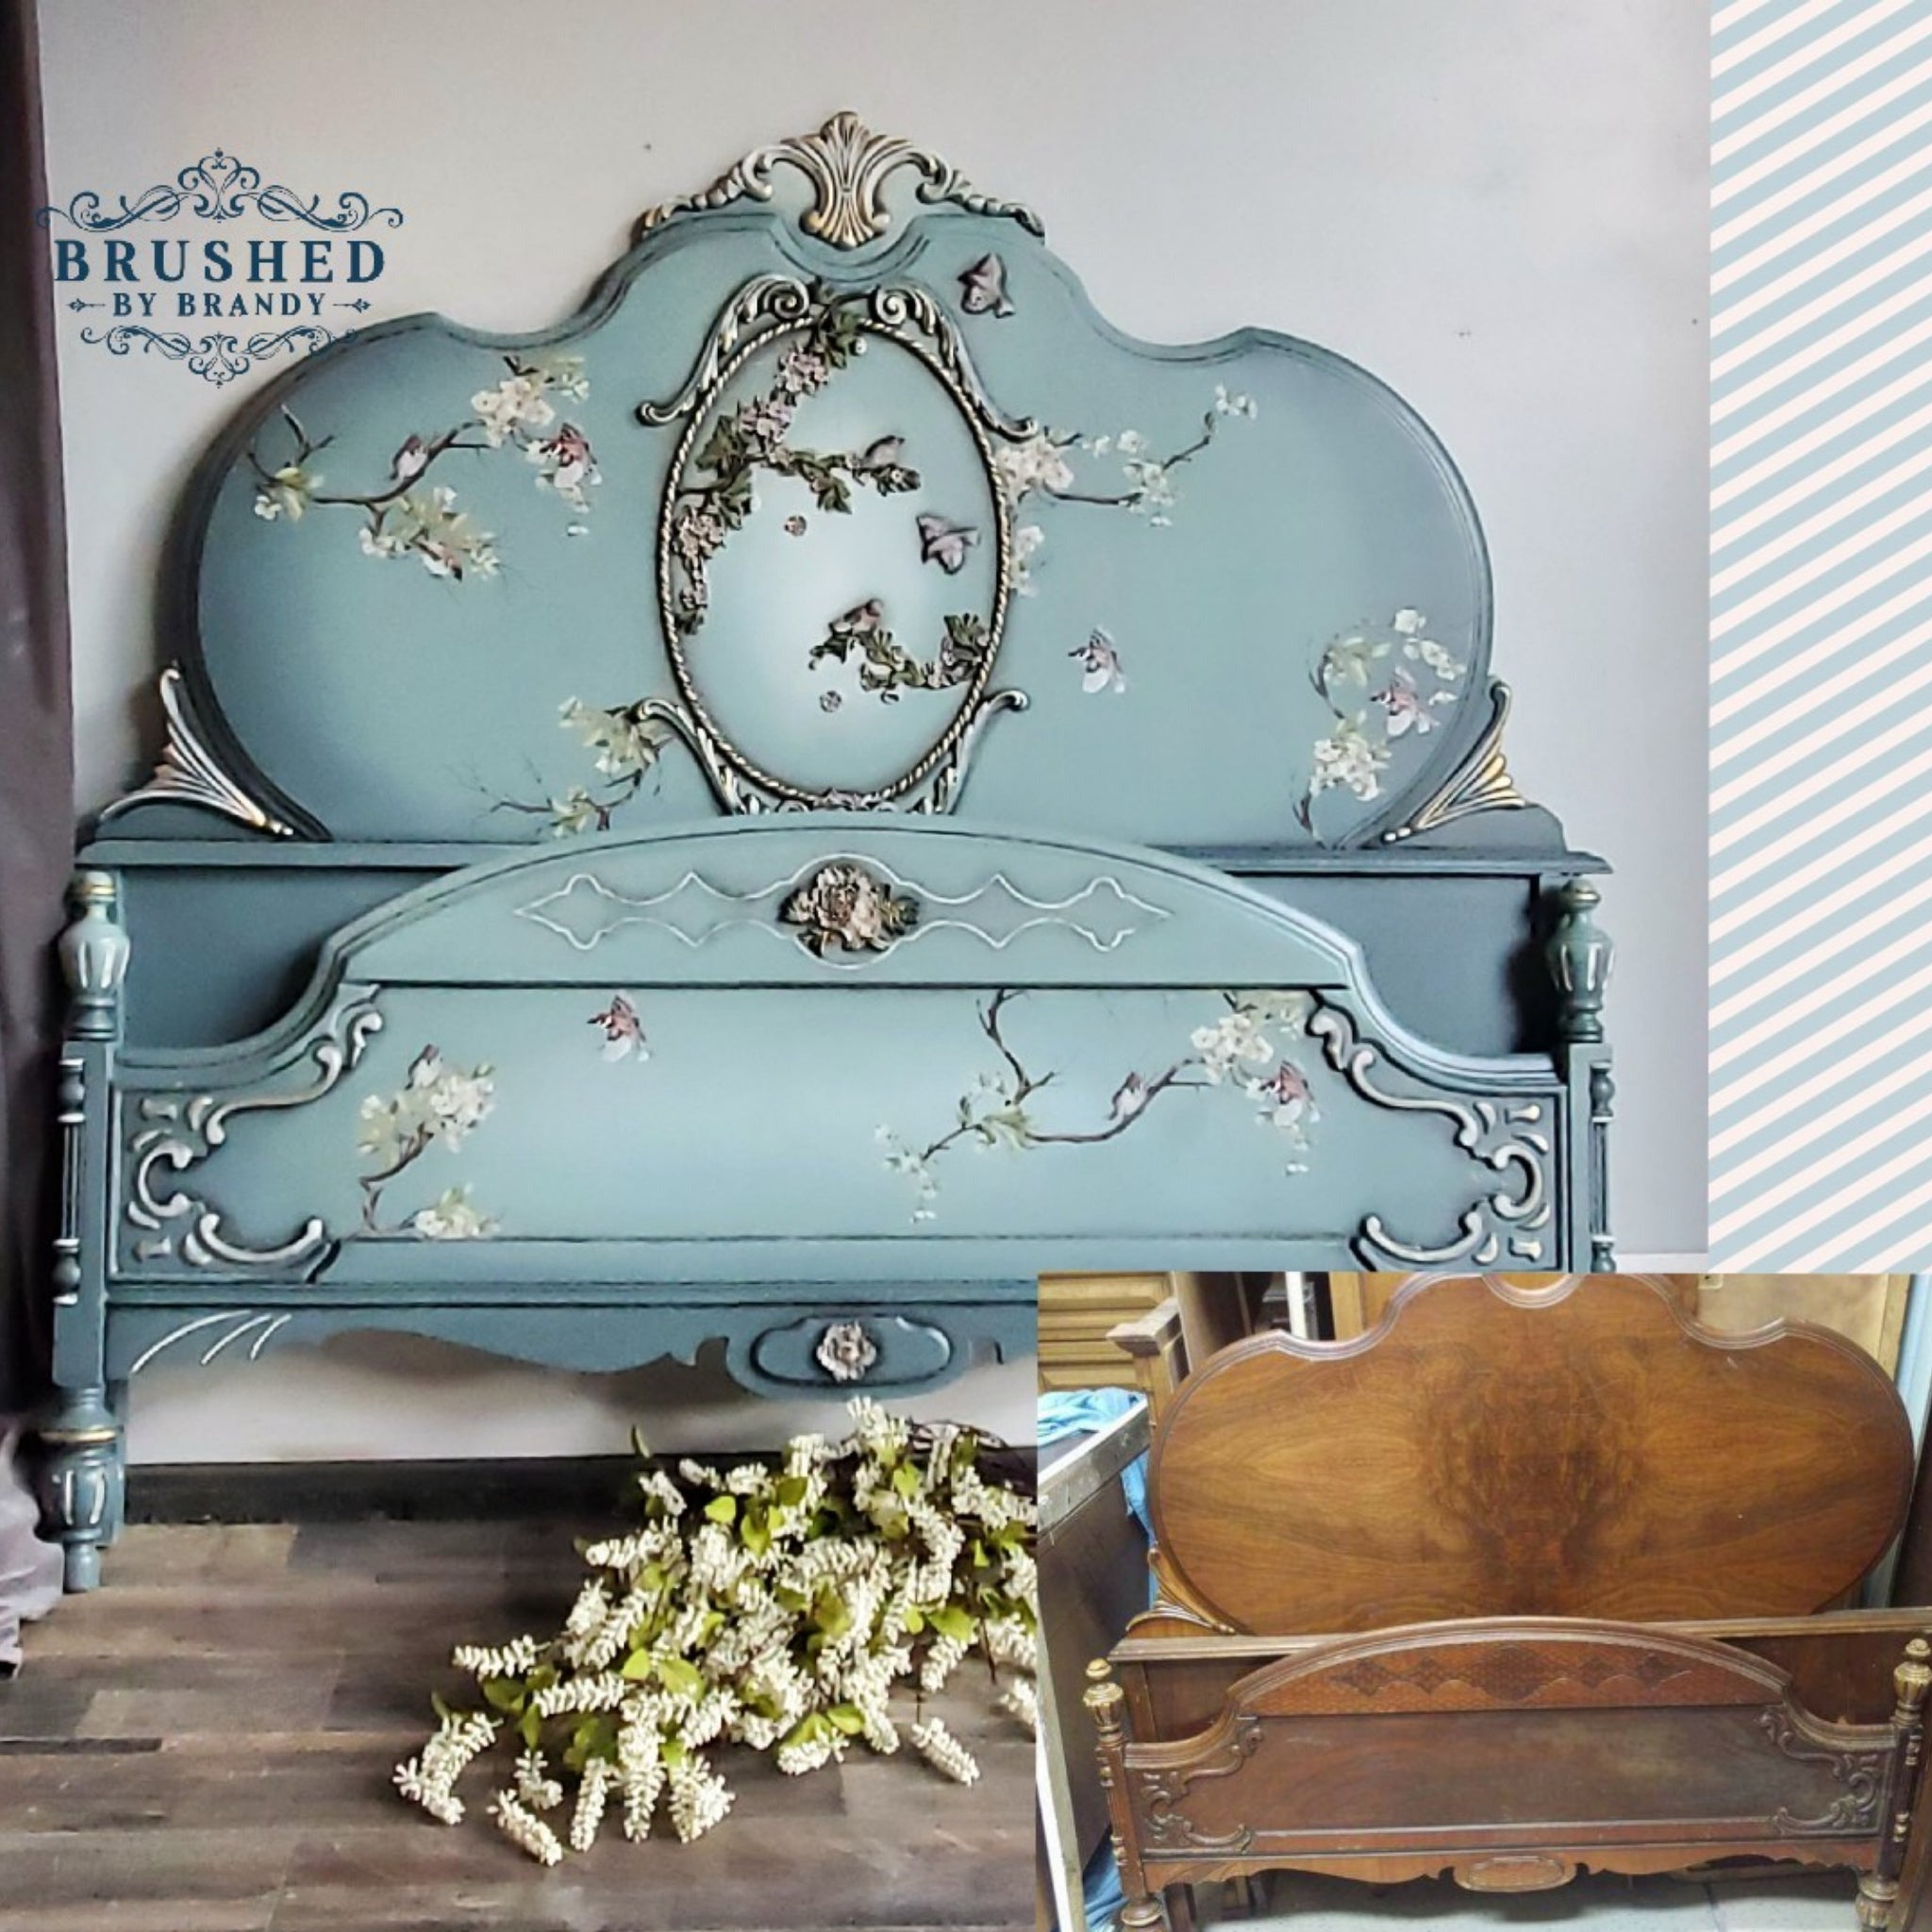 Vintage headboard and footboard refurbished by Brushed by Brandy is painted light blue and features the Aviary silicone mould on them.